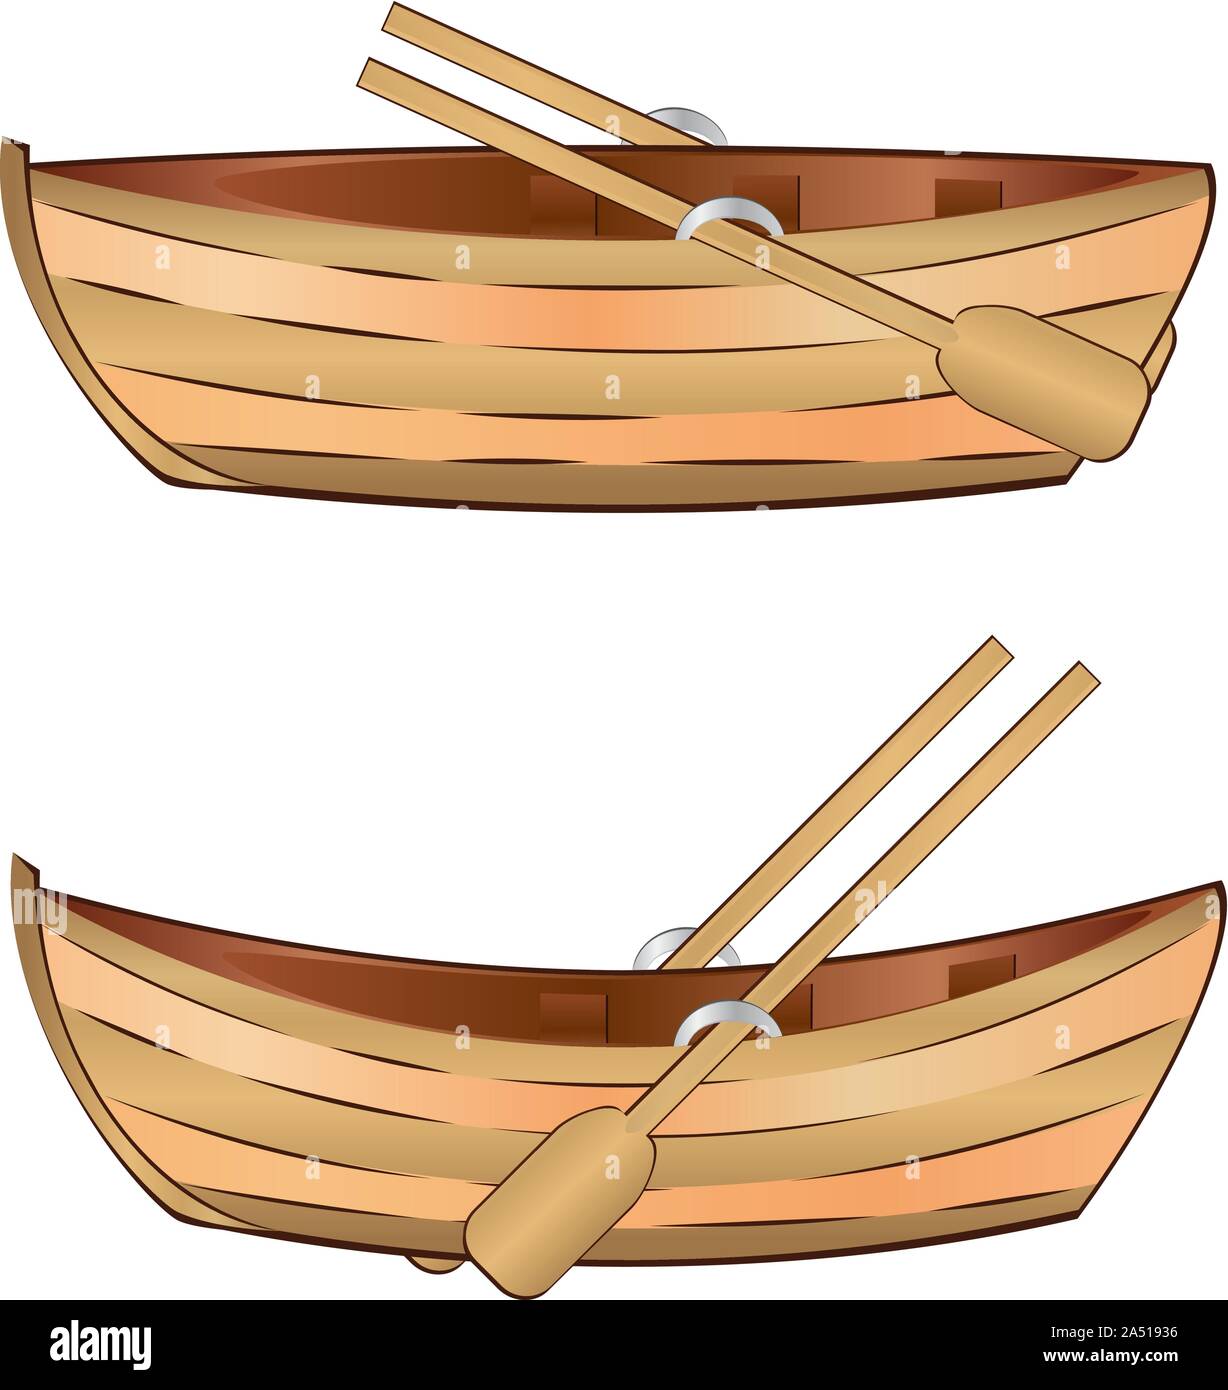 Vintage wooden boat with paddles on white background. Stock Vector